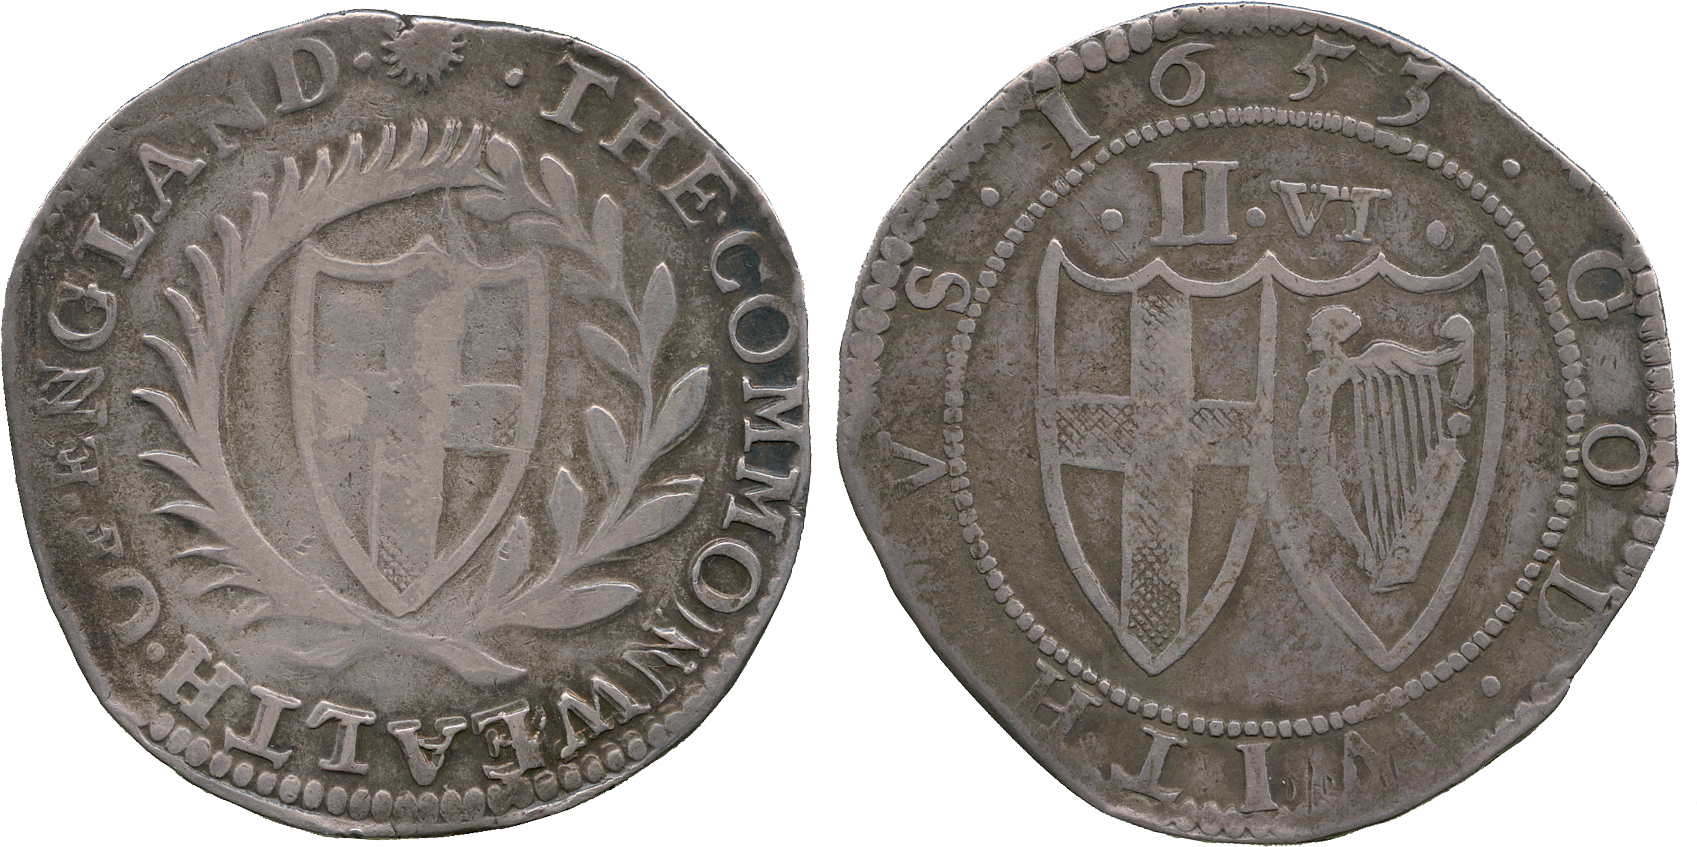 BRITISH COINS, Commonwealth, Silver Halfcrown, 1653, English shield within laurel and palm branch,